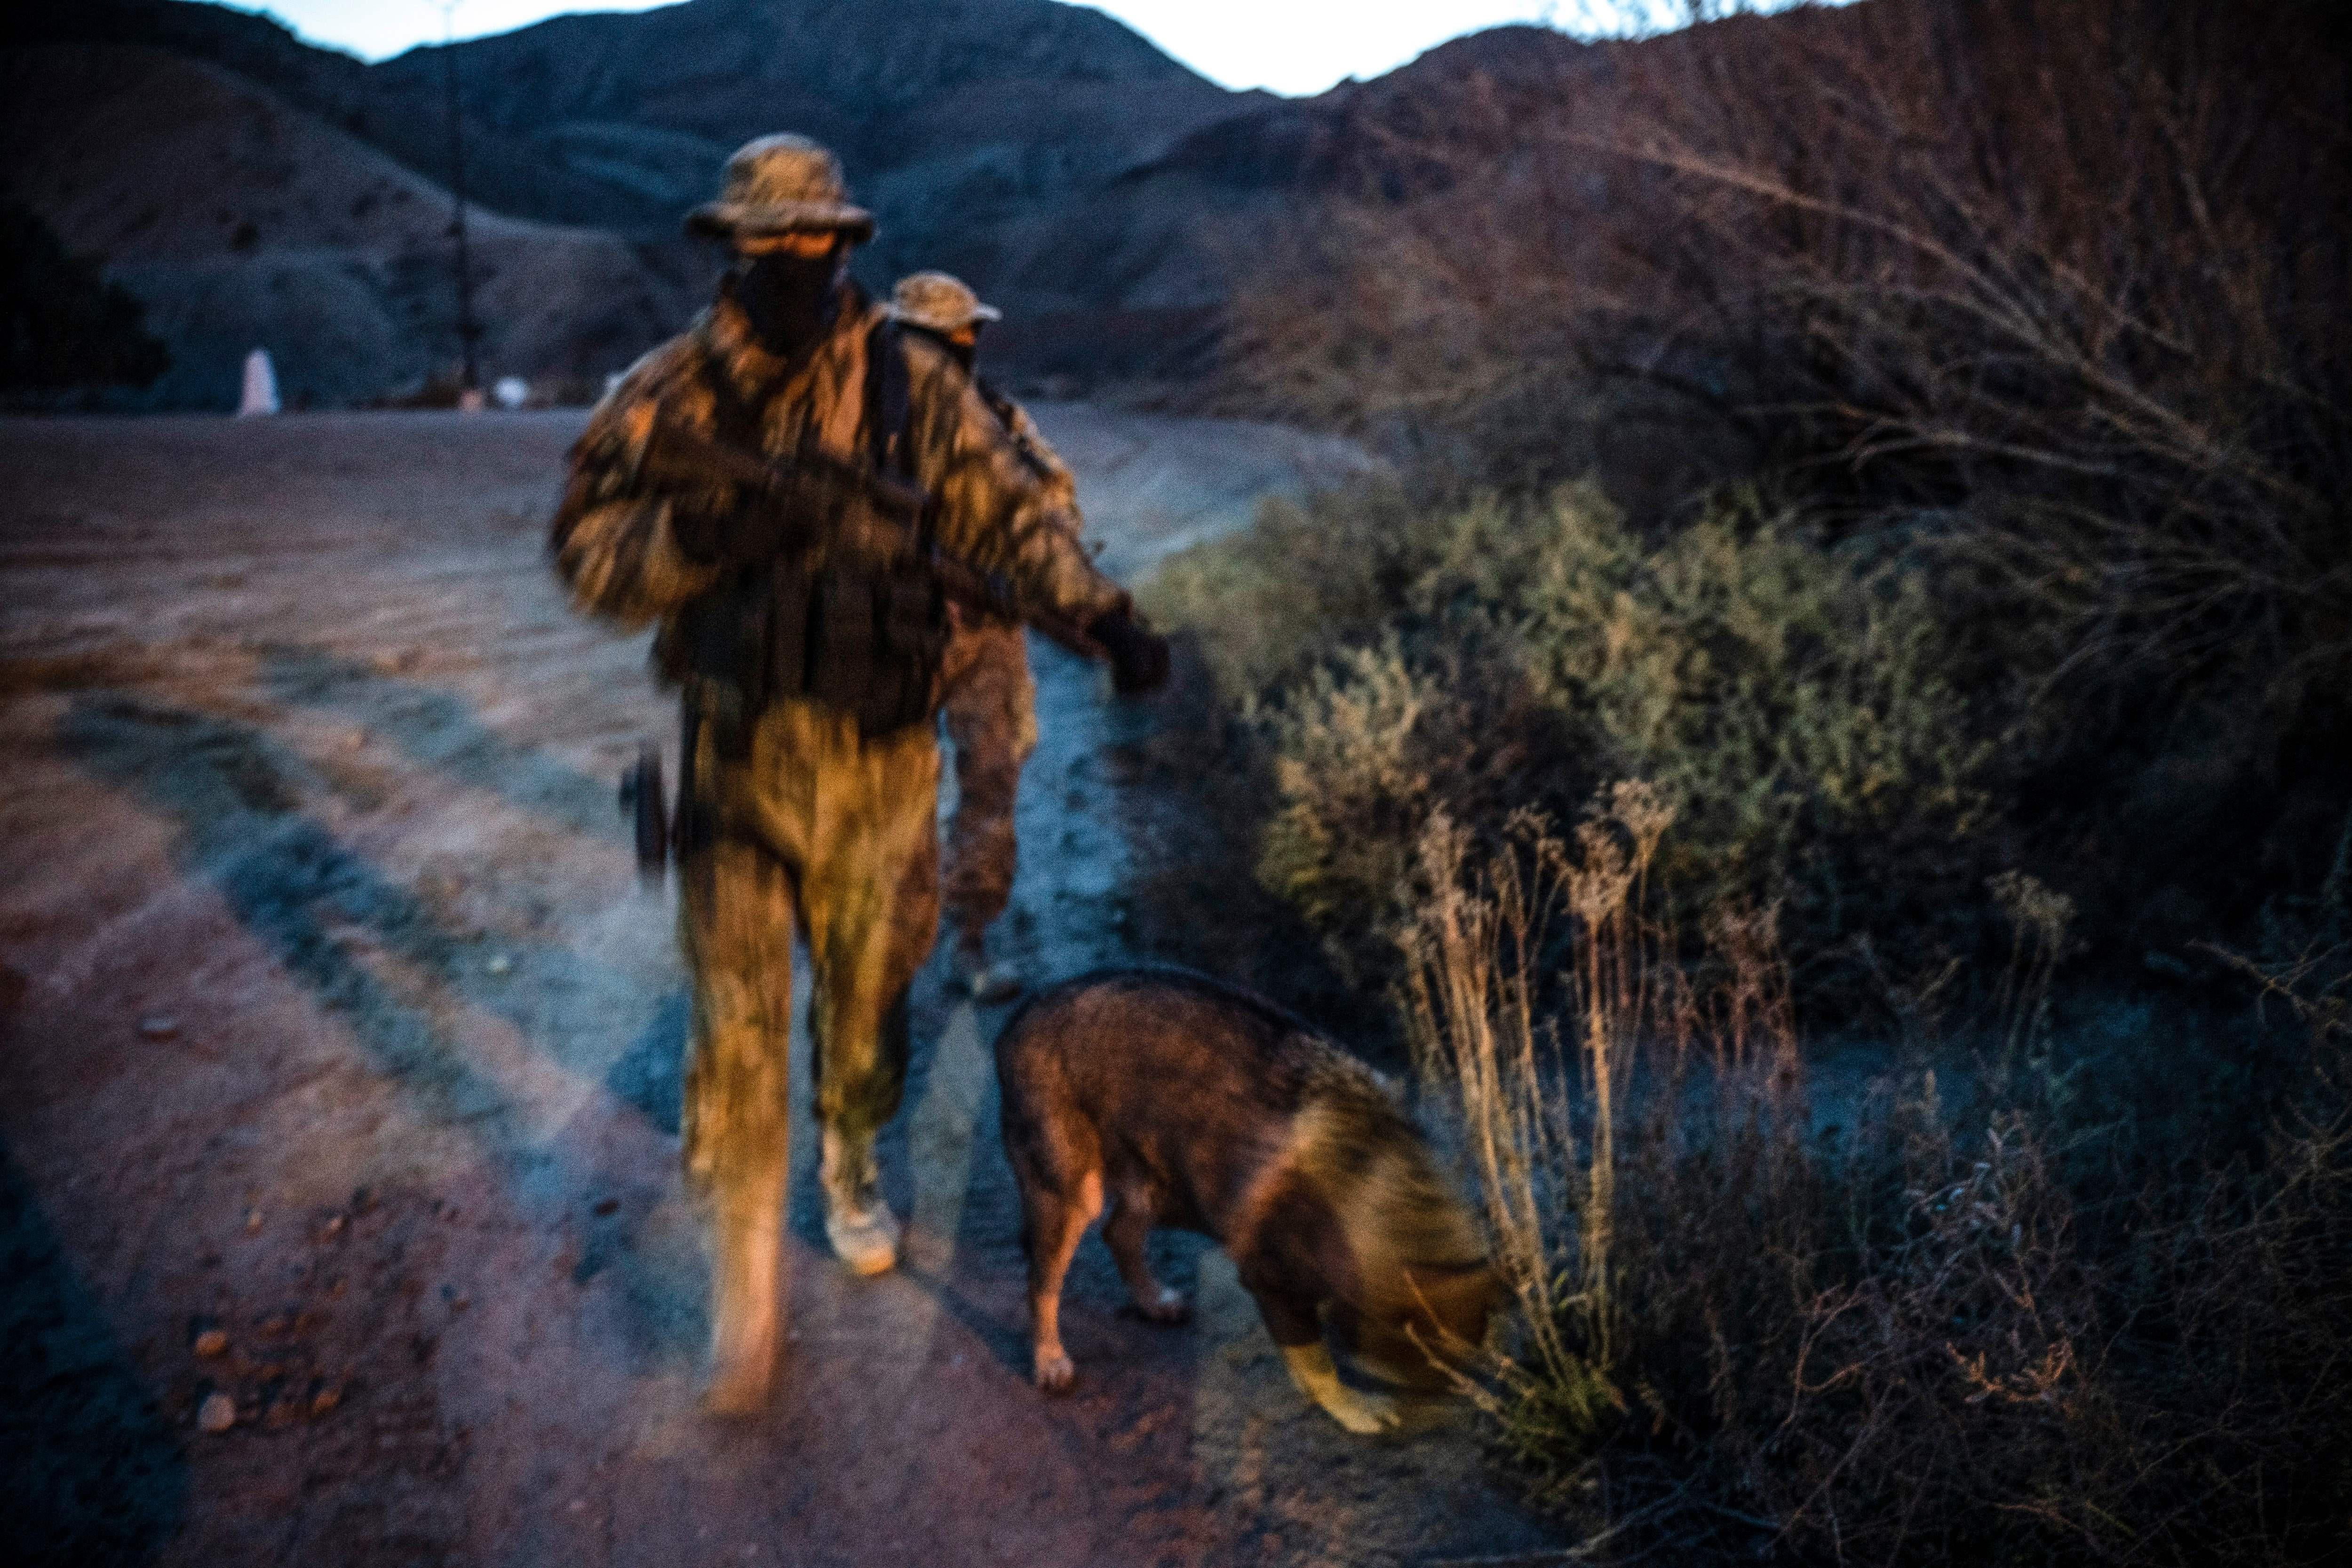 Members of the Constitutional Patriots New Mexico Border Ops Team militia, Viper and Stinger who go by aliases to protect their identity, patrol the US-Mexico border in Sunland Park, New Mexico on March 20, 2019. 